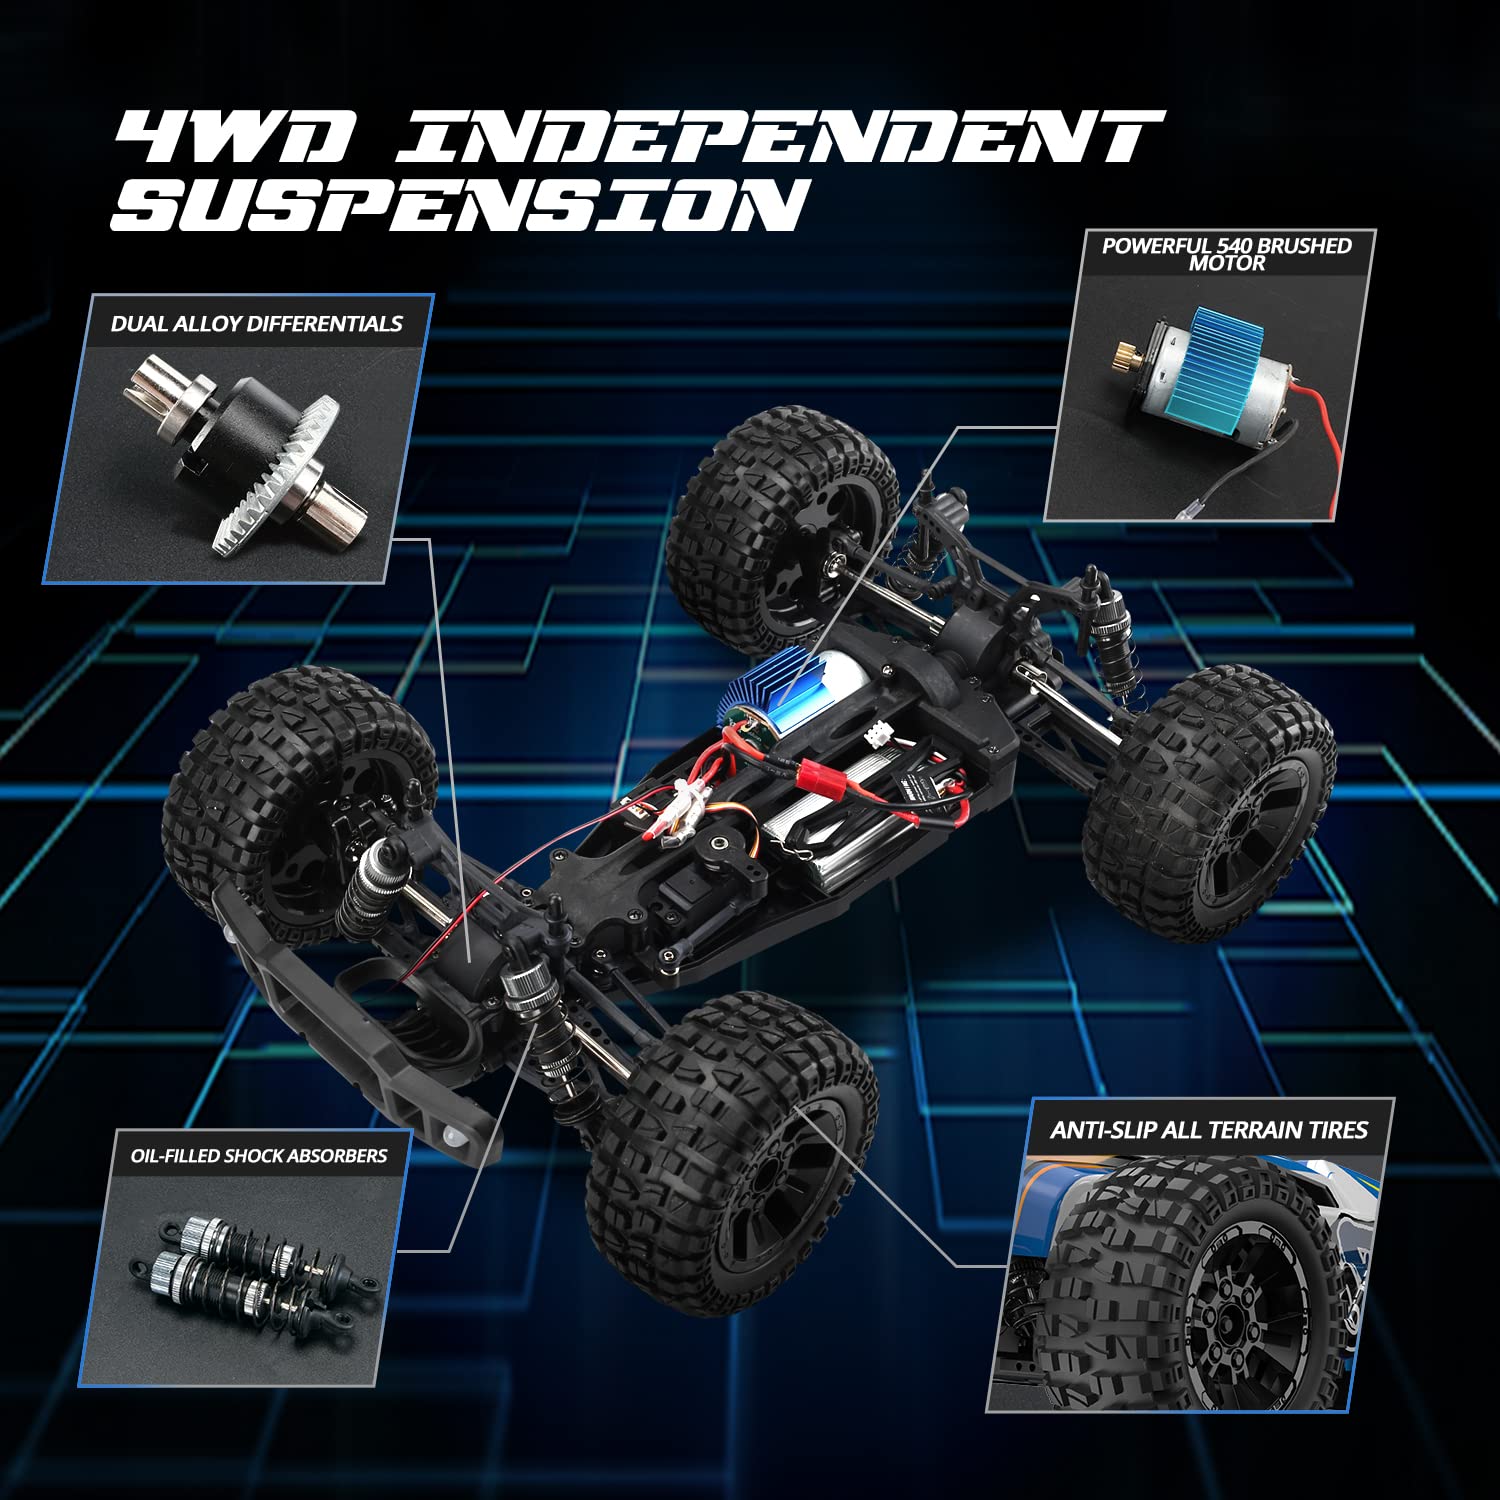 DEERC Remote Control Car 1:10 Scale RC Cars 48+ KM/H High Speed 40+ min Play , 4WD All Terrains Off Road Monster Truck for Adults and Kids Hobby RC Truck Vehicle, 2 Battery Crawler Toy Gift for Boys